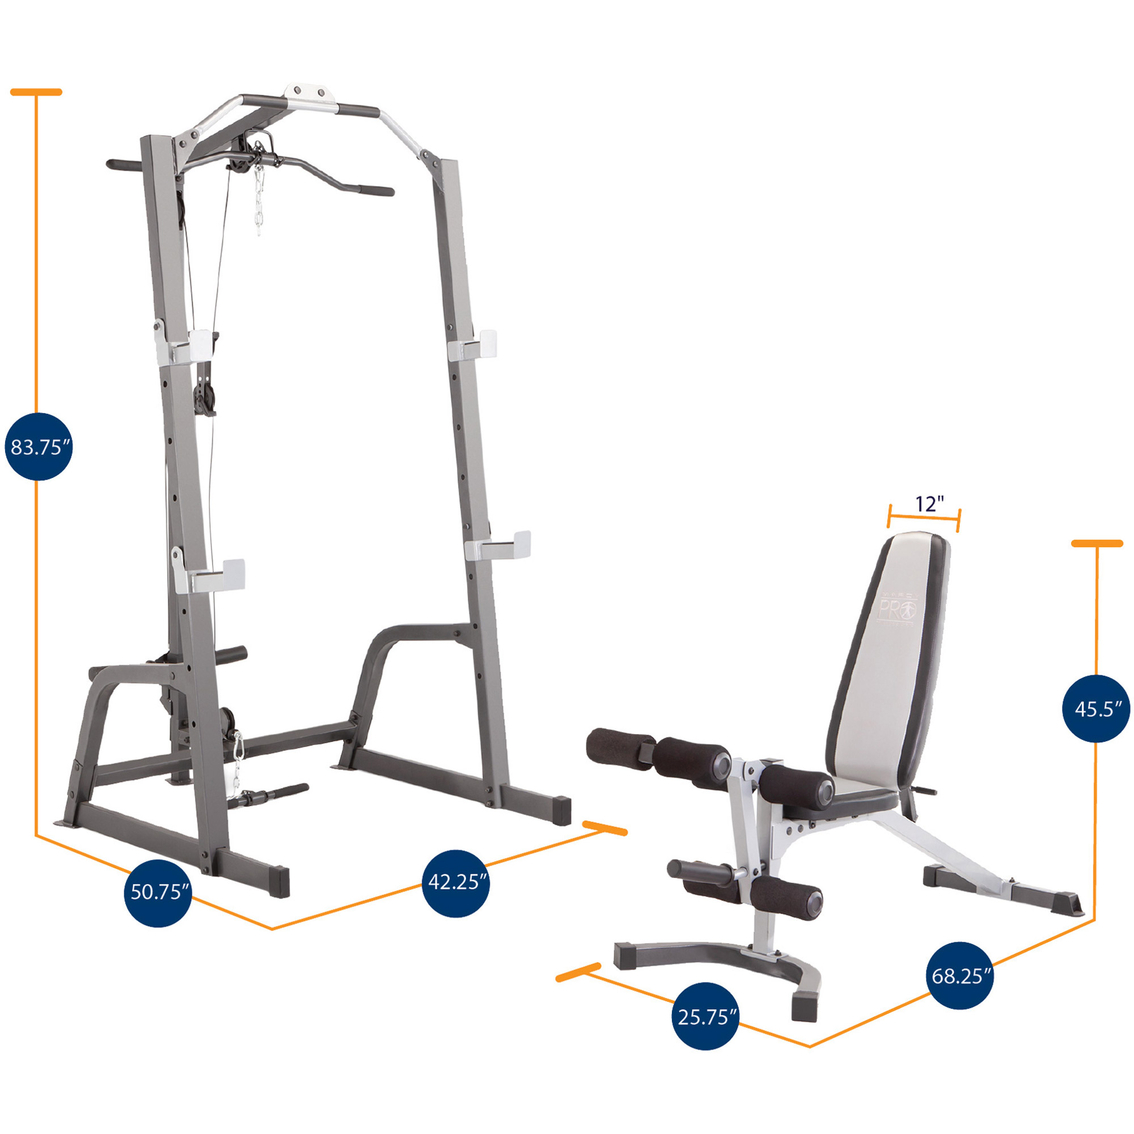 Marcy Pro Deluxe Cage System with Weight Lifting Bench - Image 3 of 7